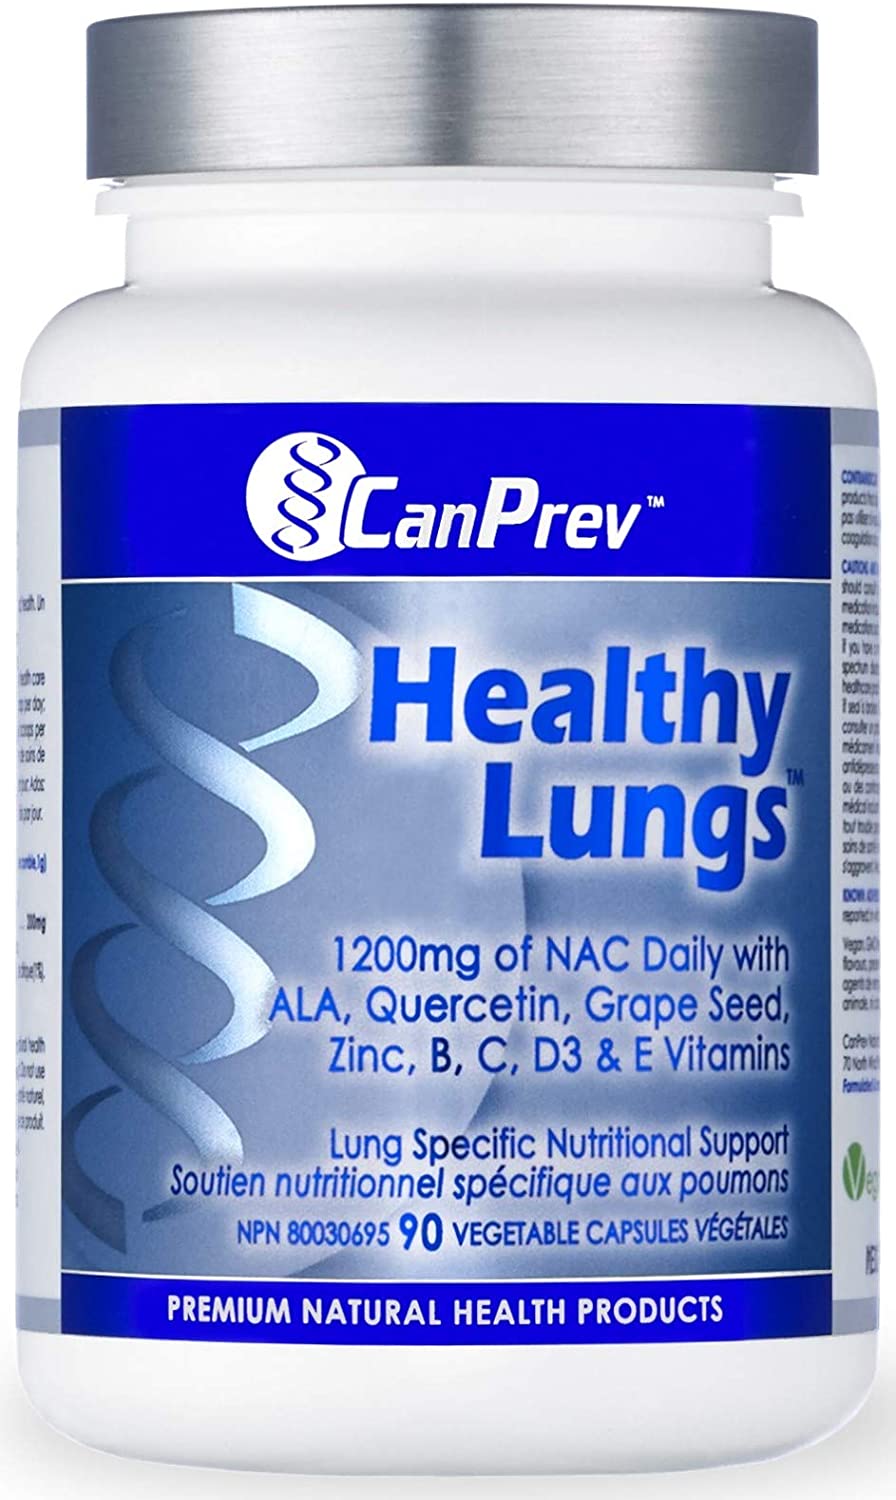 CANPREV HEALTHY LUNGS 90 VEGGIE CAPSULES